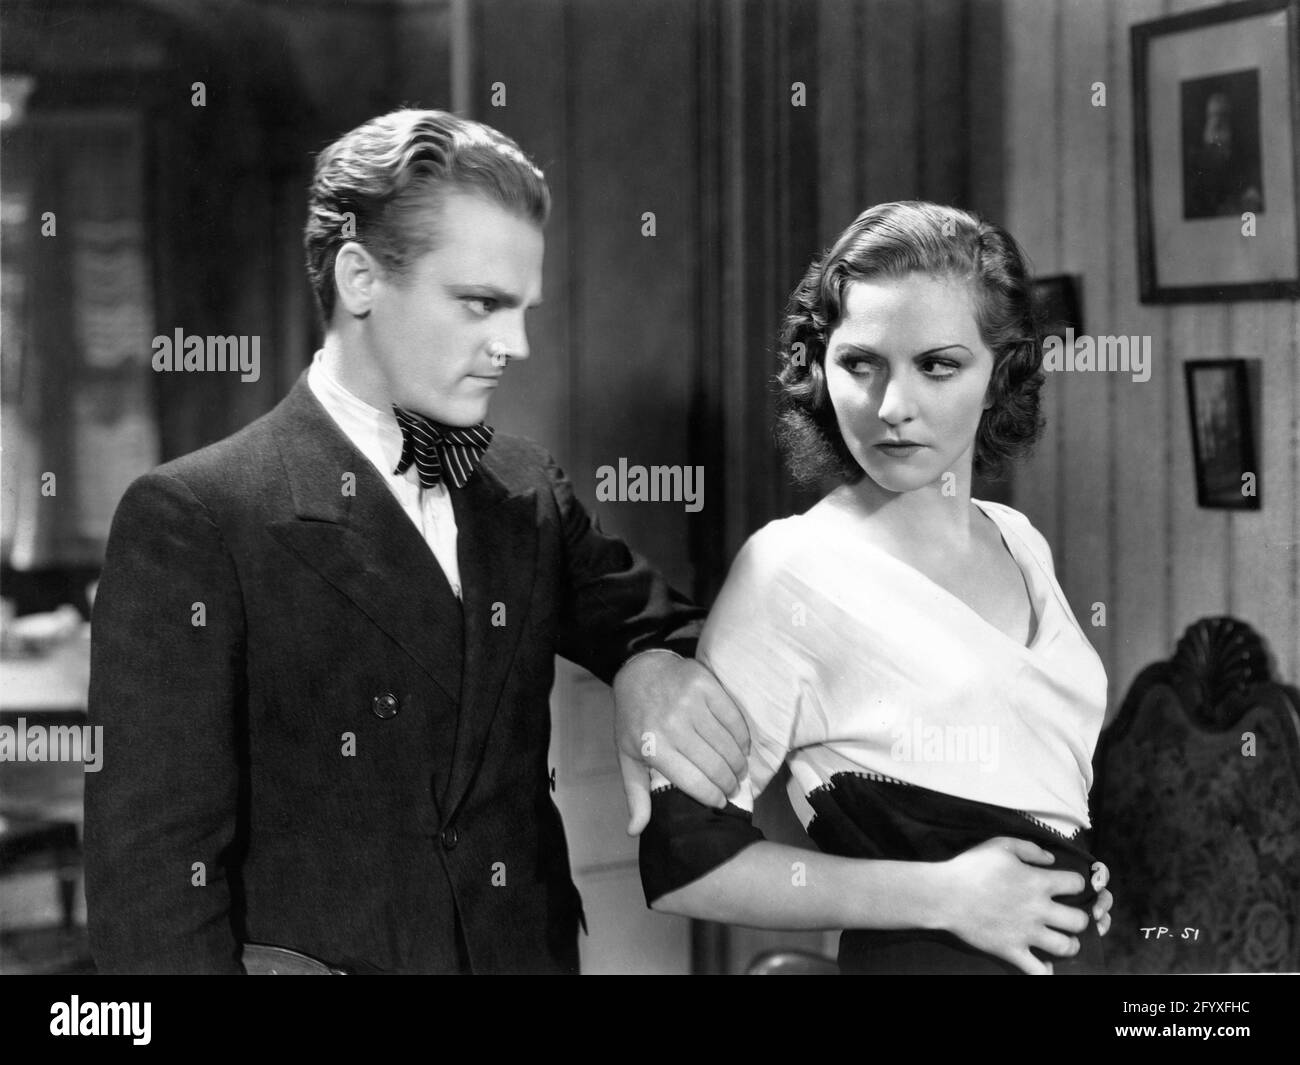 JAMES CAGNEY and DOROTHY BURGESS in TAXI 1931 director ROY DEL RUTH based on the play by Kenyon Nicholson adaptation and dialogue Kubec Glasmon and John Bright A Warner Bros. and Vitaphone Picture Stock Photo